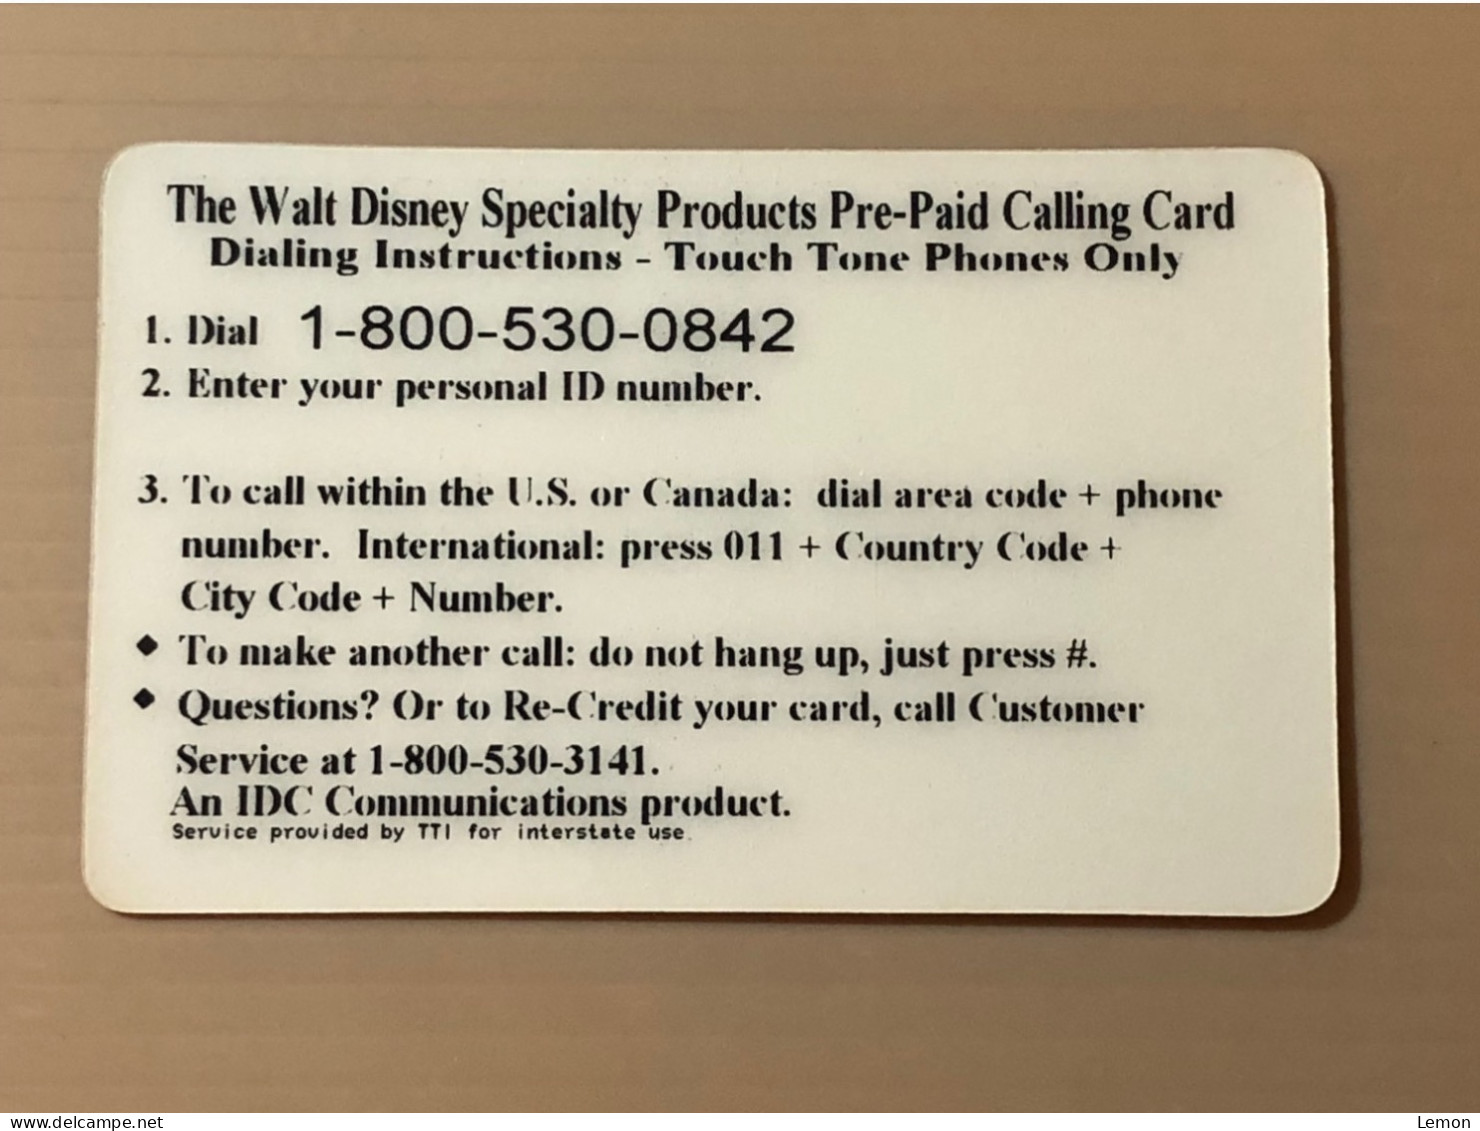 Mint USA UNITED STATES America Prepaid Telecard Phonecard, WALT DISNEY Specialty Product SAMPLE CARD, Set Of 1 Mint Card - Collezioni